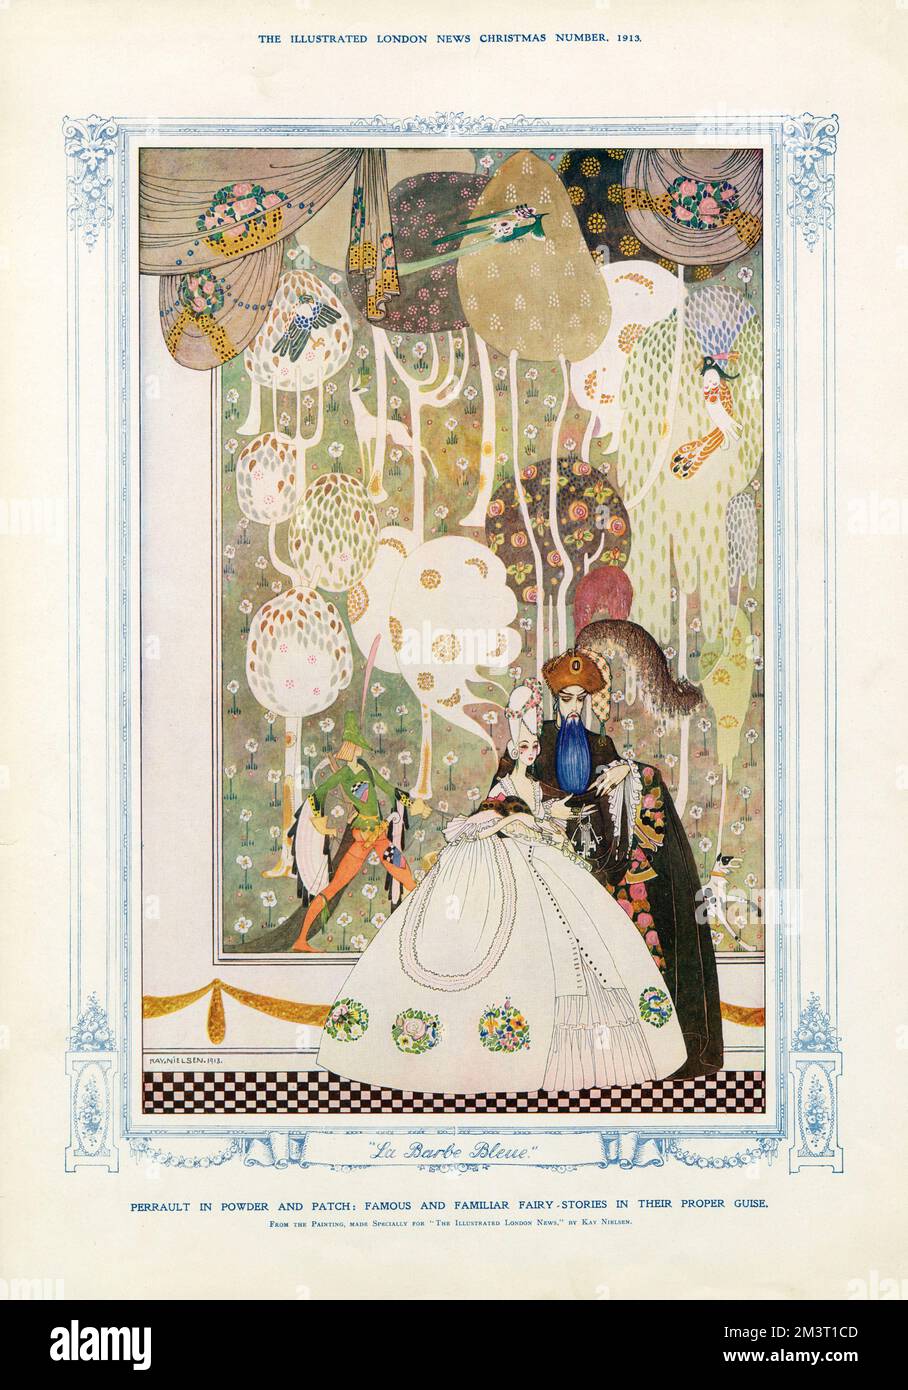 Perrault in Powder and Patch - Famous and Familiar fairy stories in their proper guise - Bluebeard (La Barbe Bleue) - from the painting by Kay Nielsen made specially for The Illustrated London News. Stock Photo